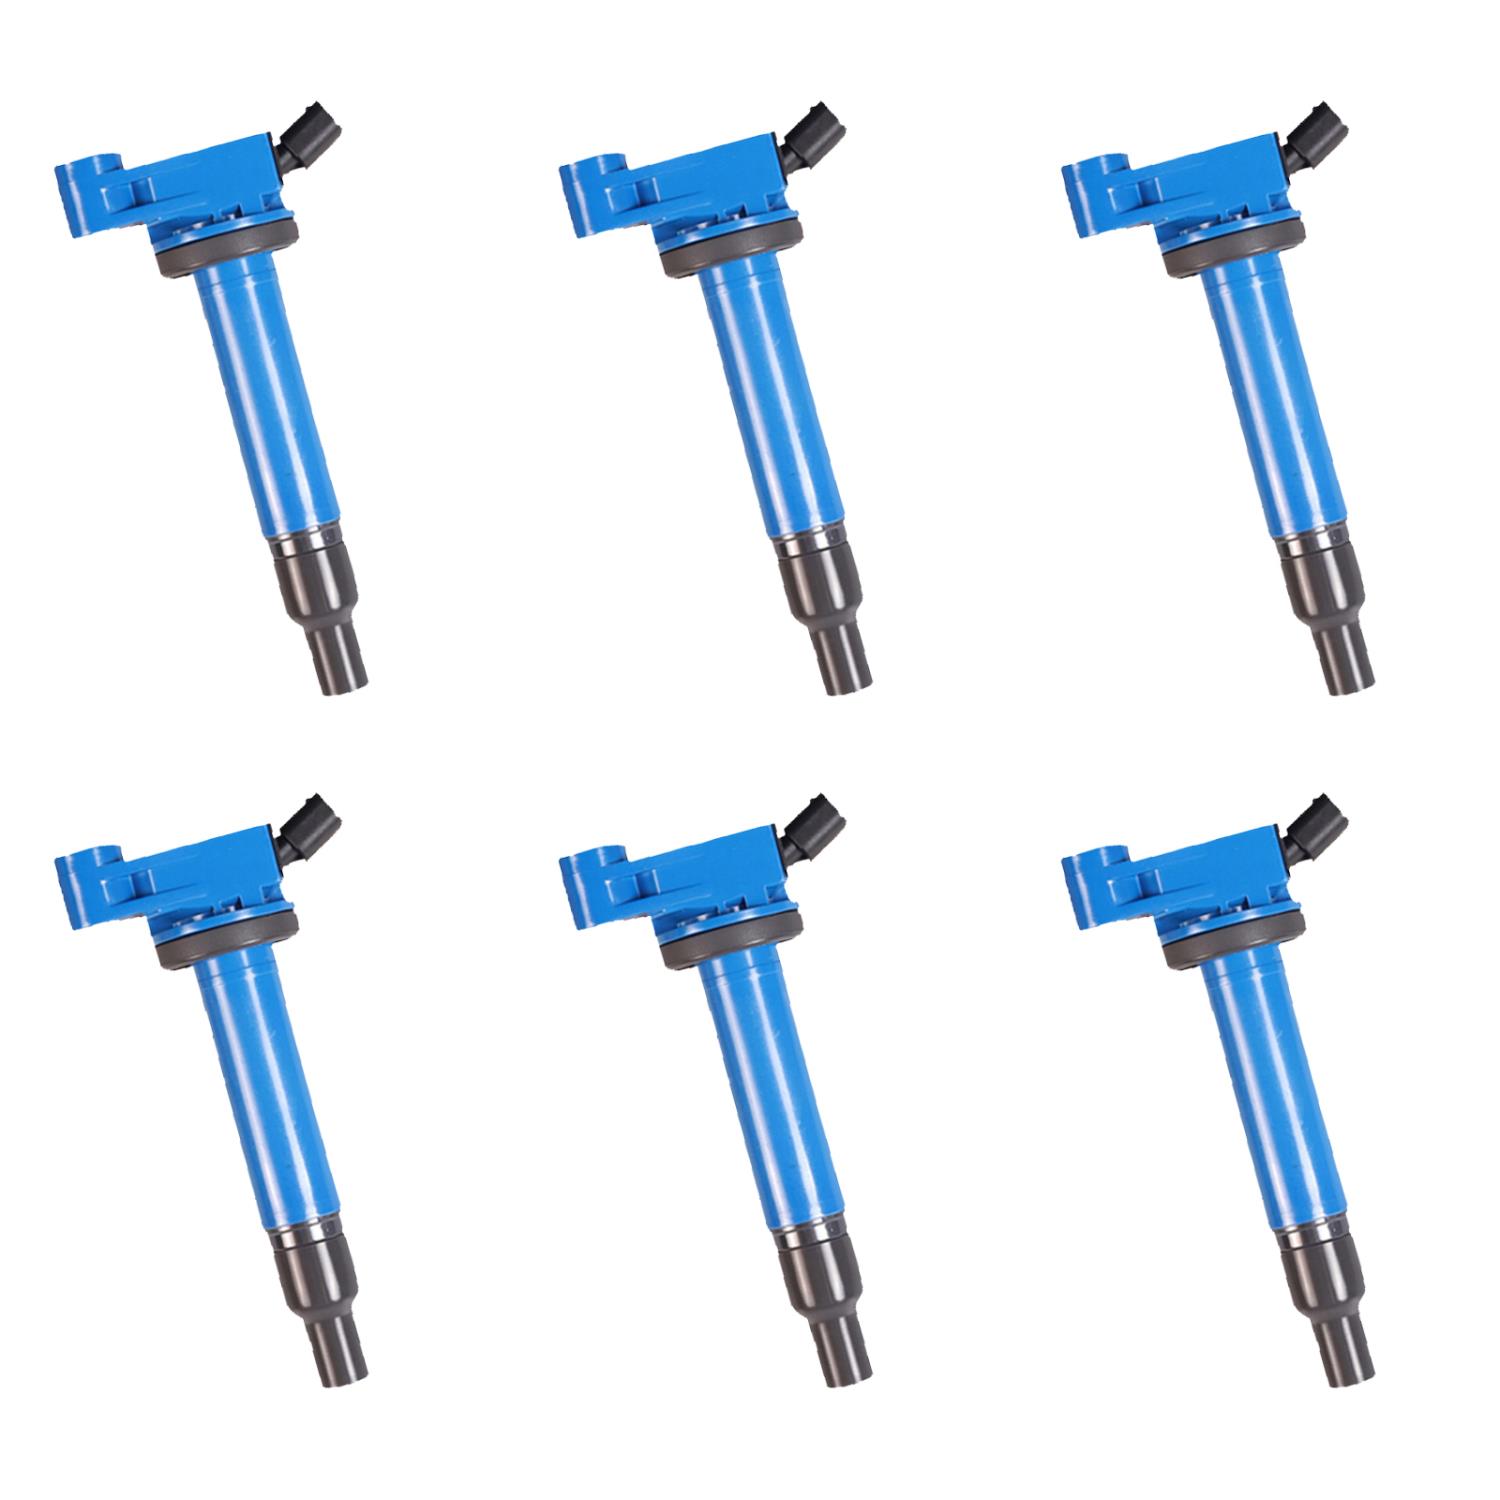 High-Performance Ignition Coils for Toyota Camry V6 [Blue]